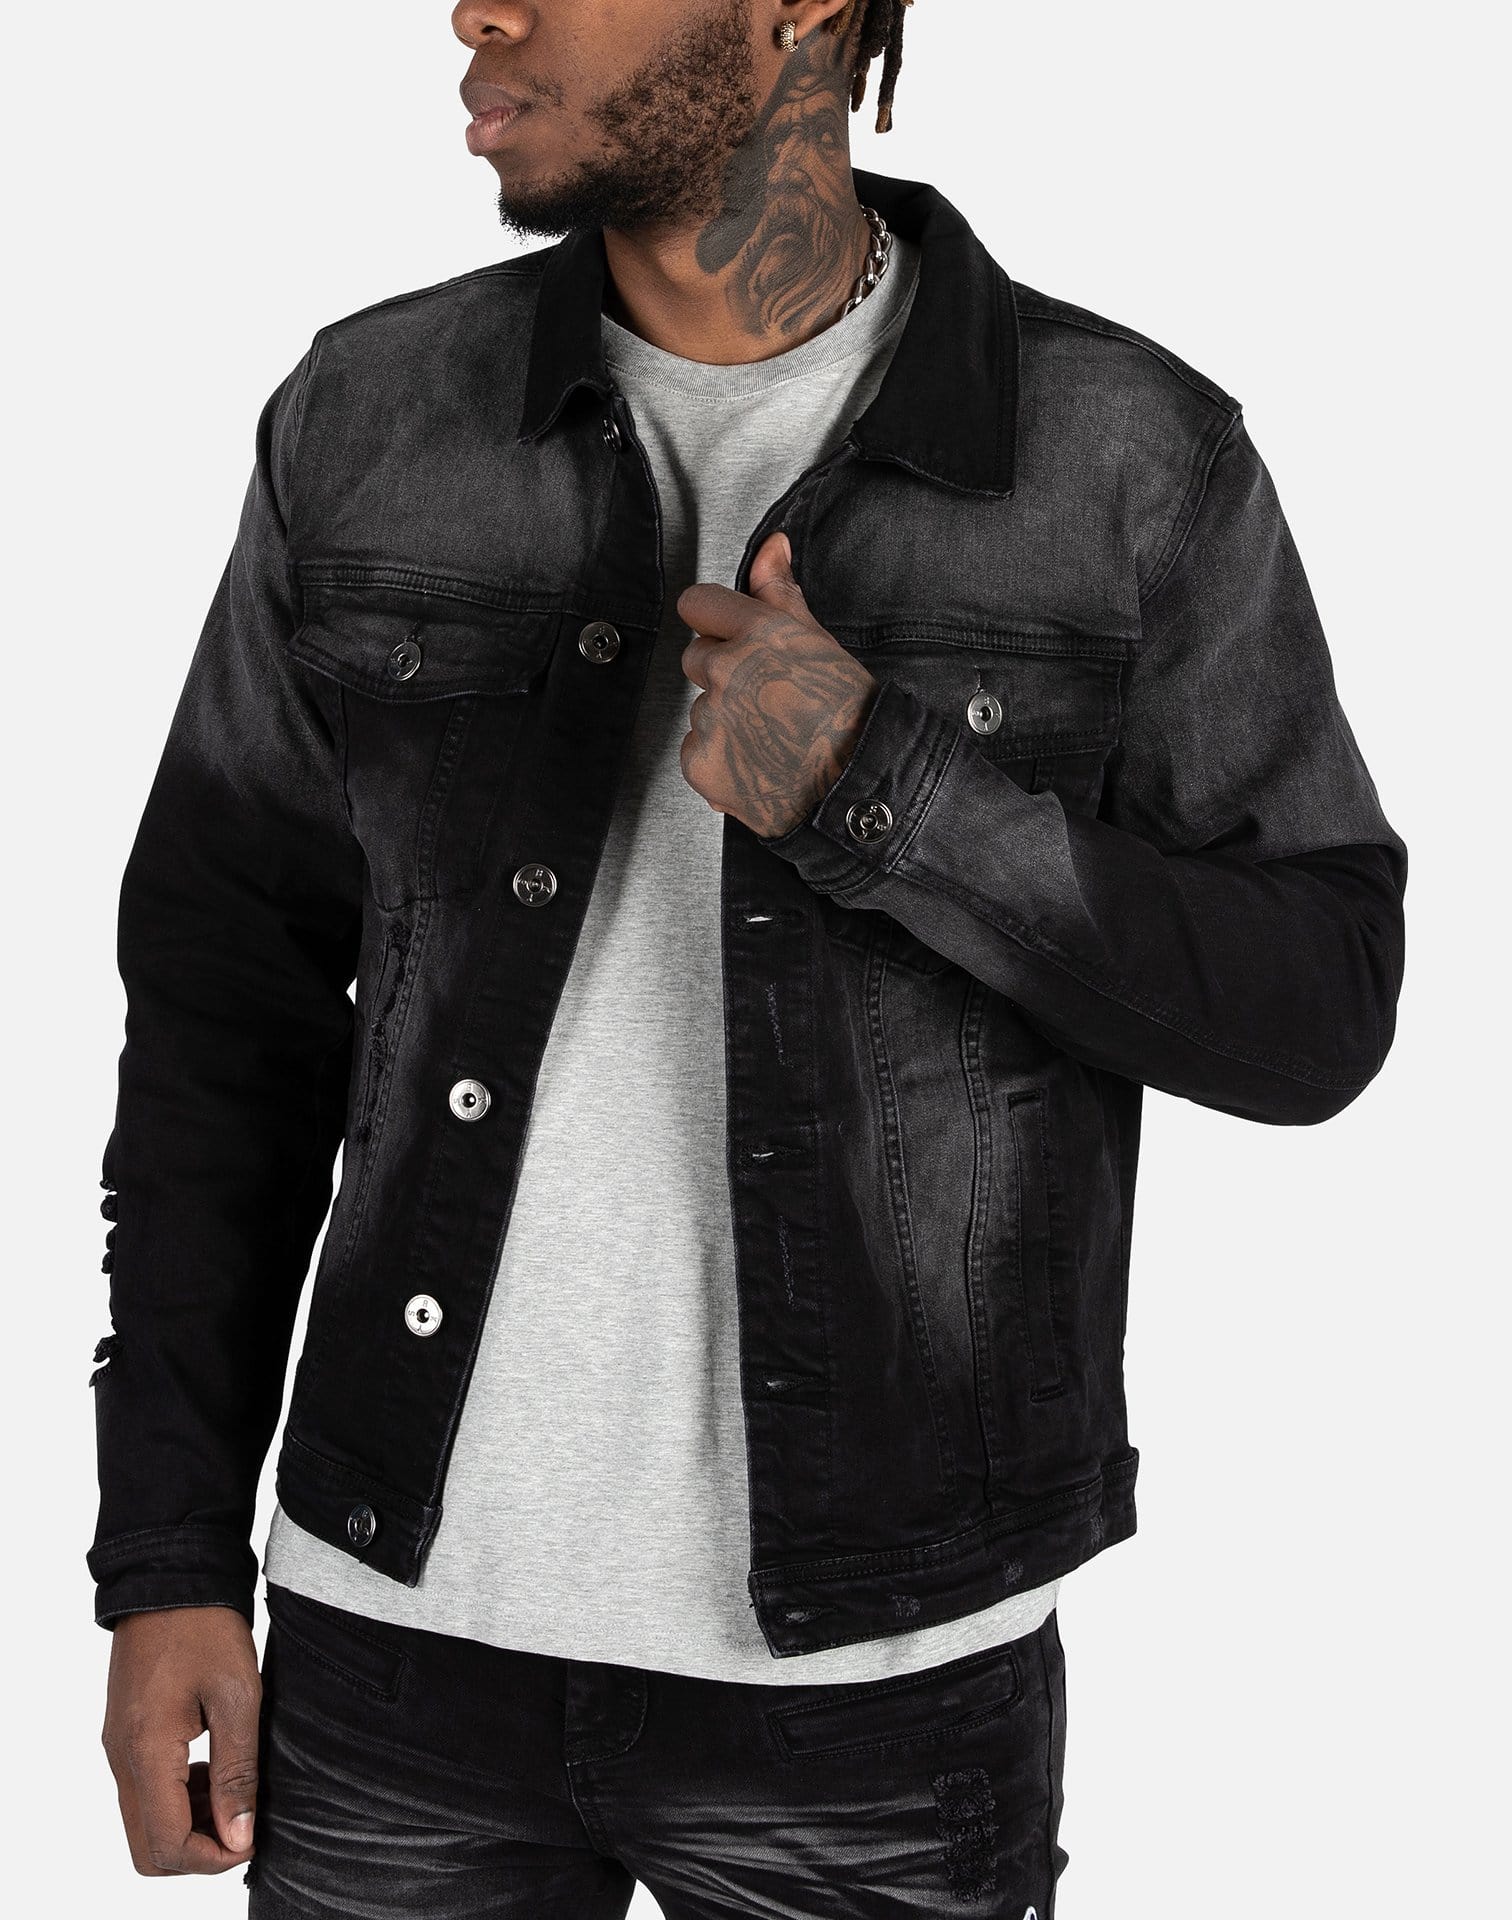 BKYS Lucky Charm Jean Jacket – DTLR